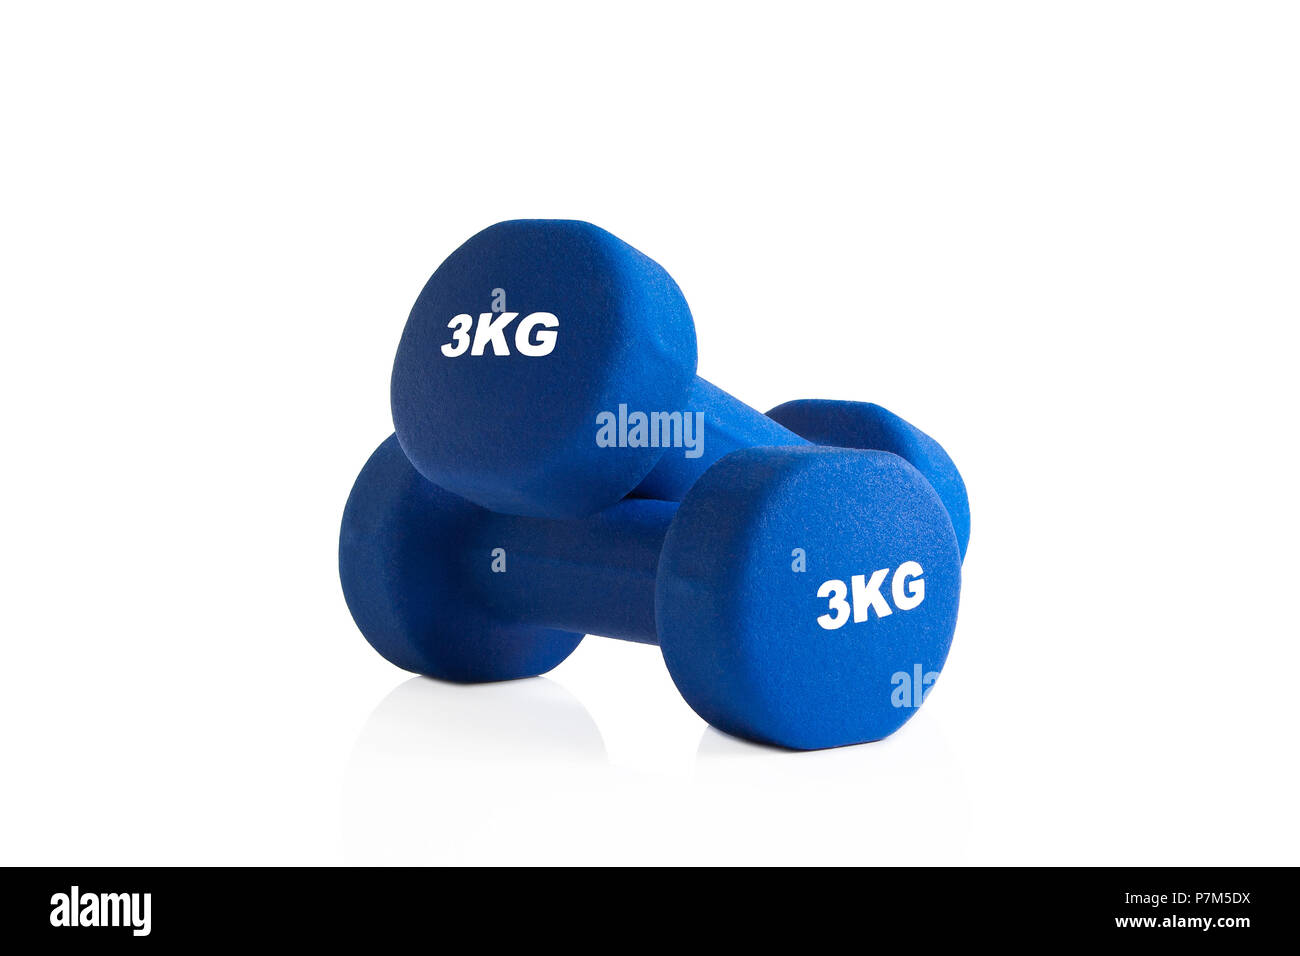 3kg pair of blue dumbbells isolated on a white background. Stock Photo